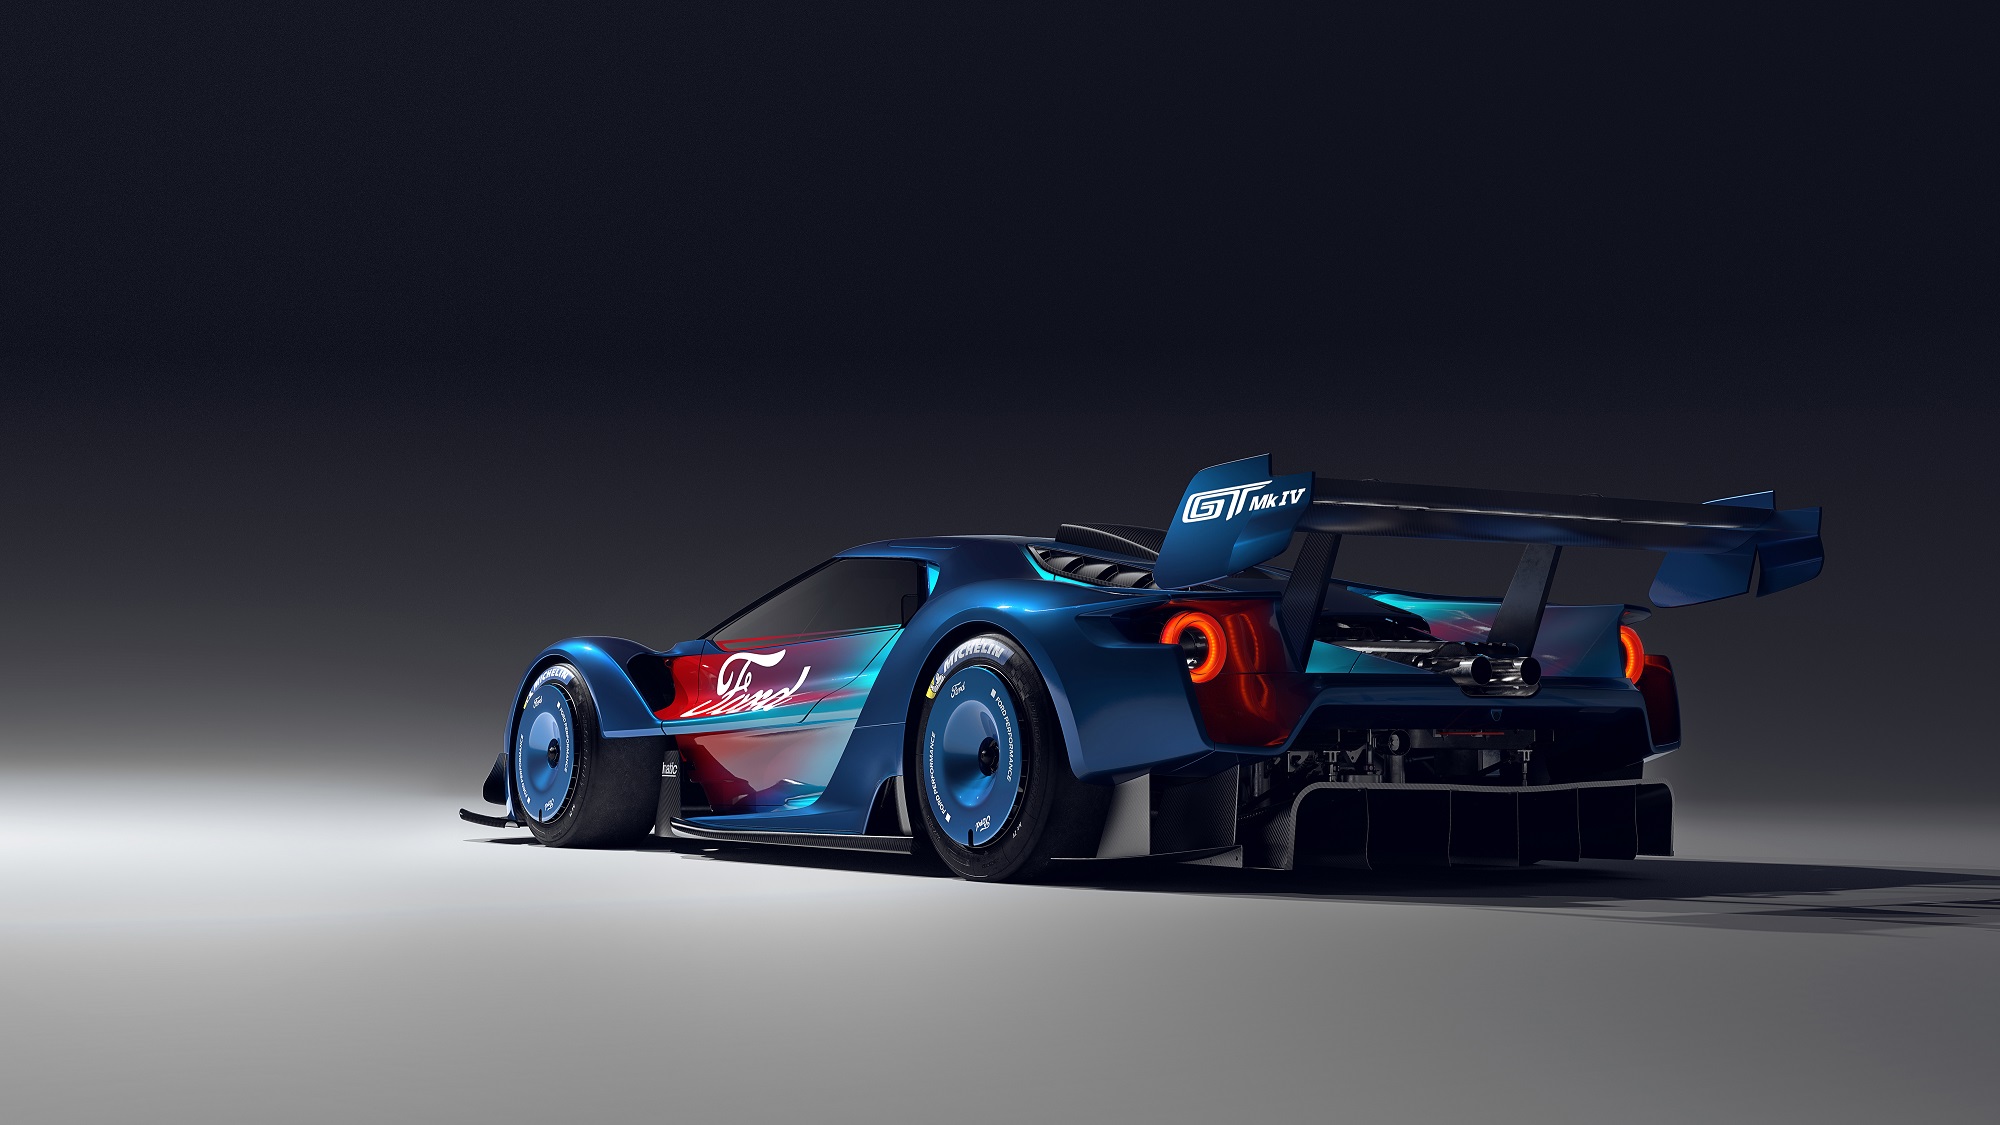 The new Ford GT Mk IV, or Mk 4, is a track-only supercar.